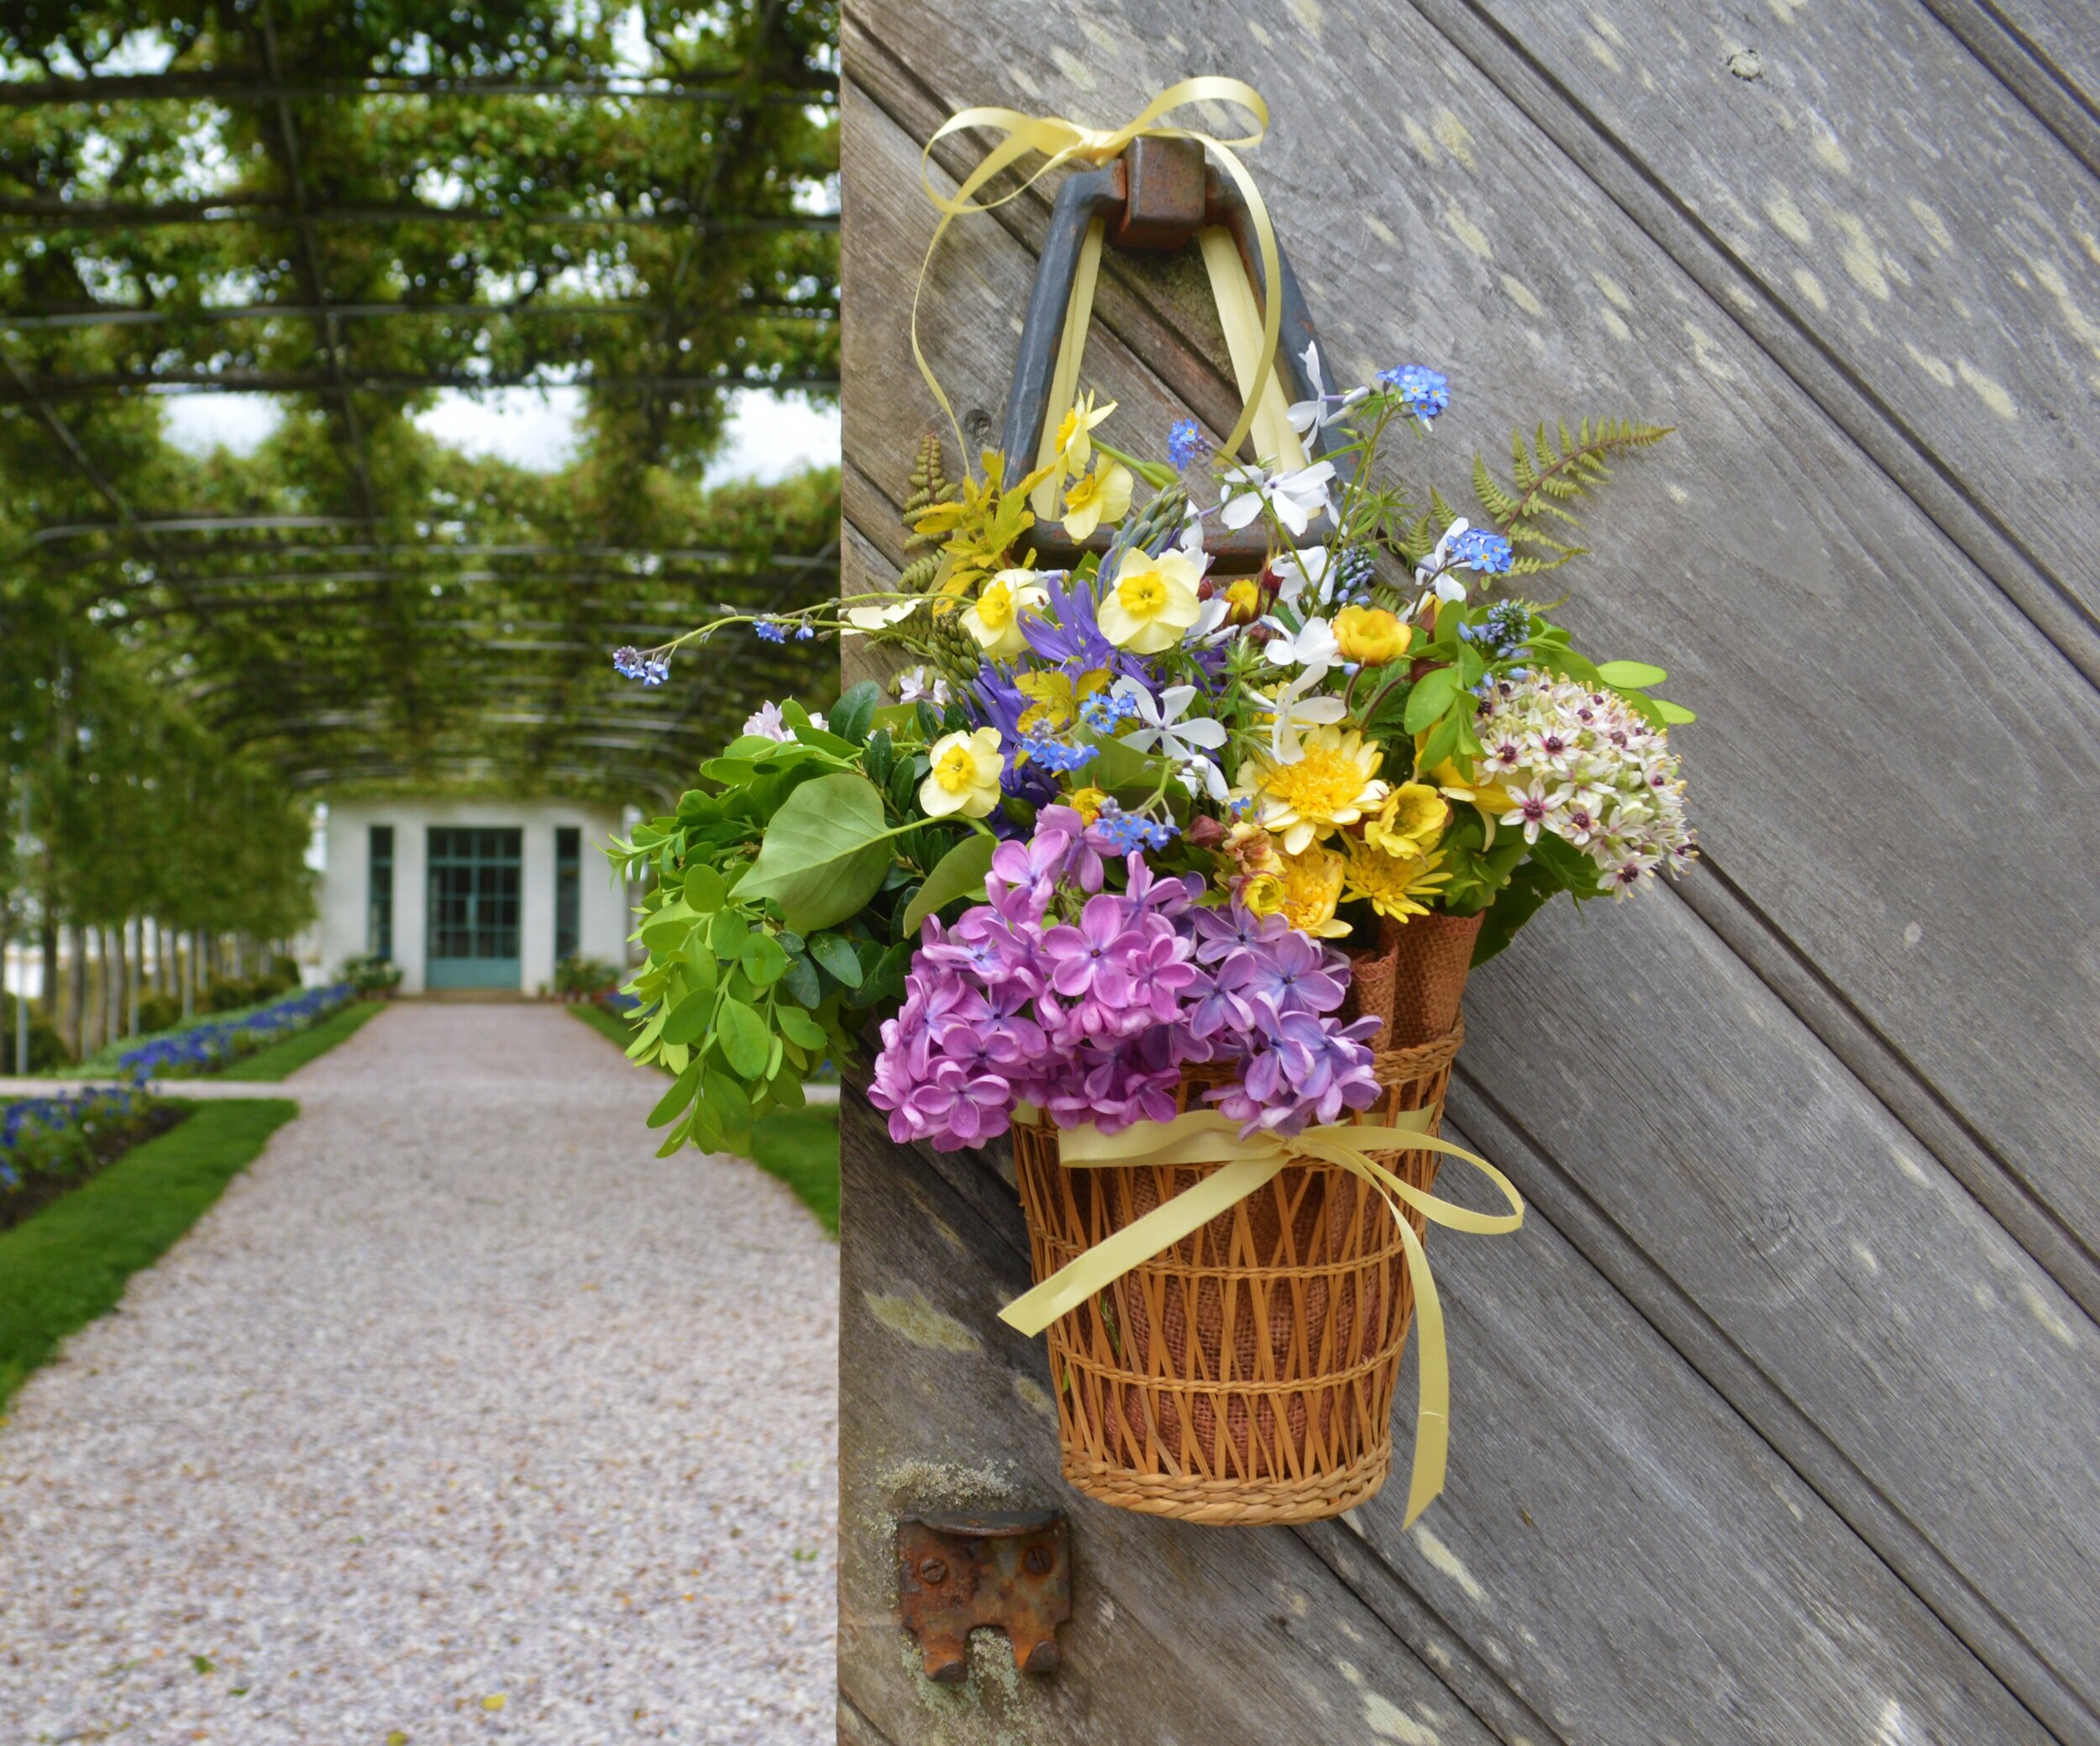   A May Day basket created by Assistant Gardener Jordan Long brightens the garden gate on an overcast day. The basket includes boxwood (buxus,) ninemark (physocarpus,) lilac (syringa,) African daisies (osteospermum,) forget-me-not (myosotis,) veronic